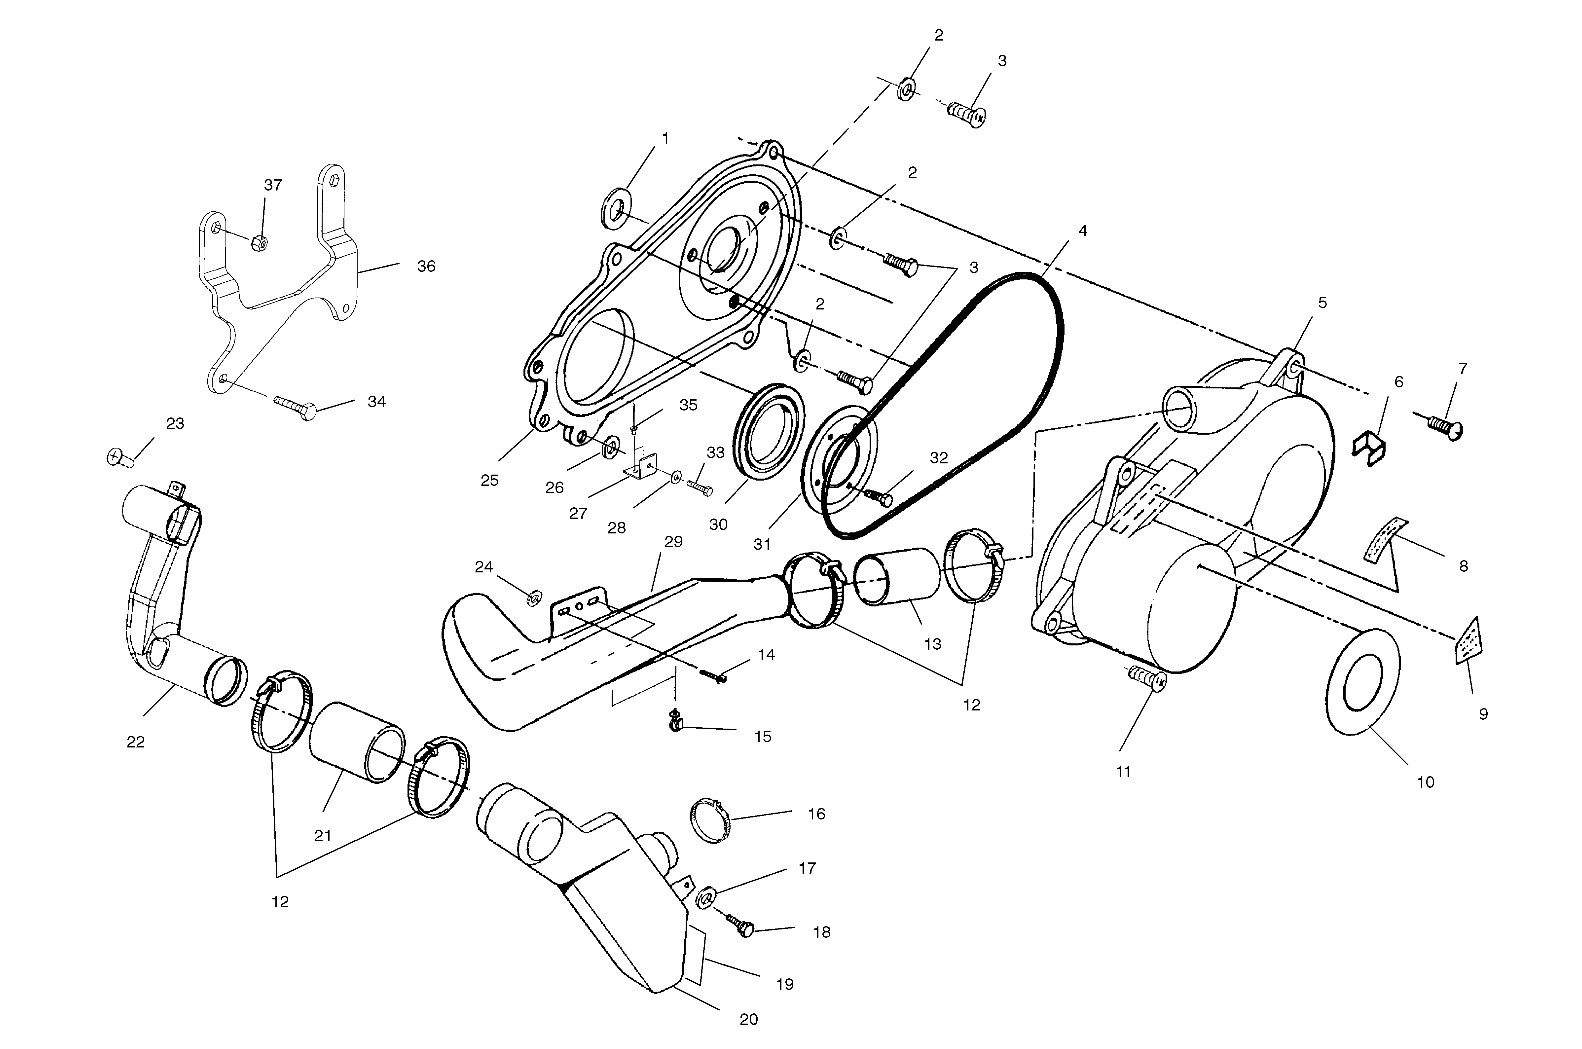 Part Number : 5433450 DUCT CLUTCH INLET